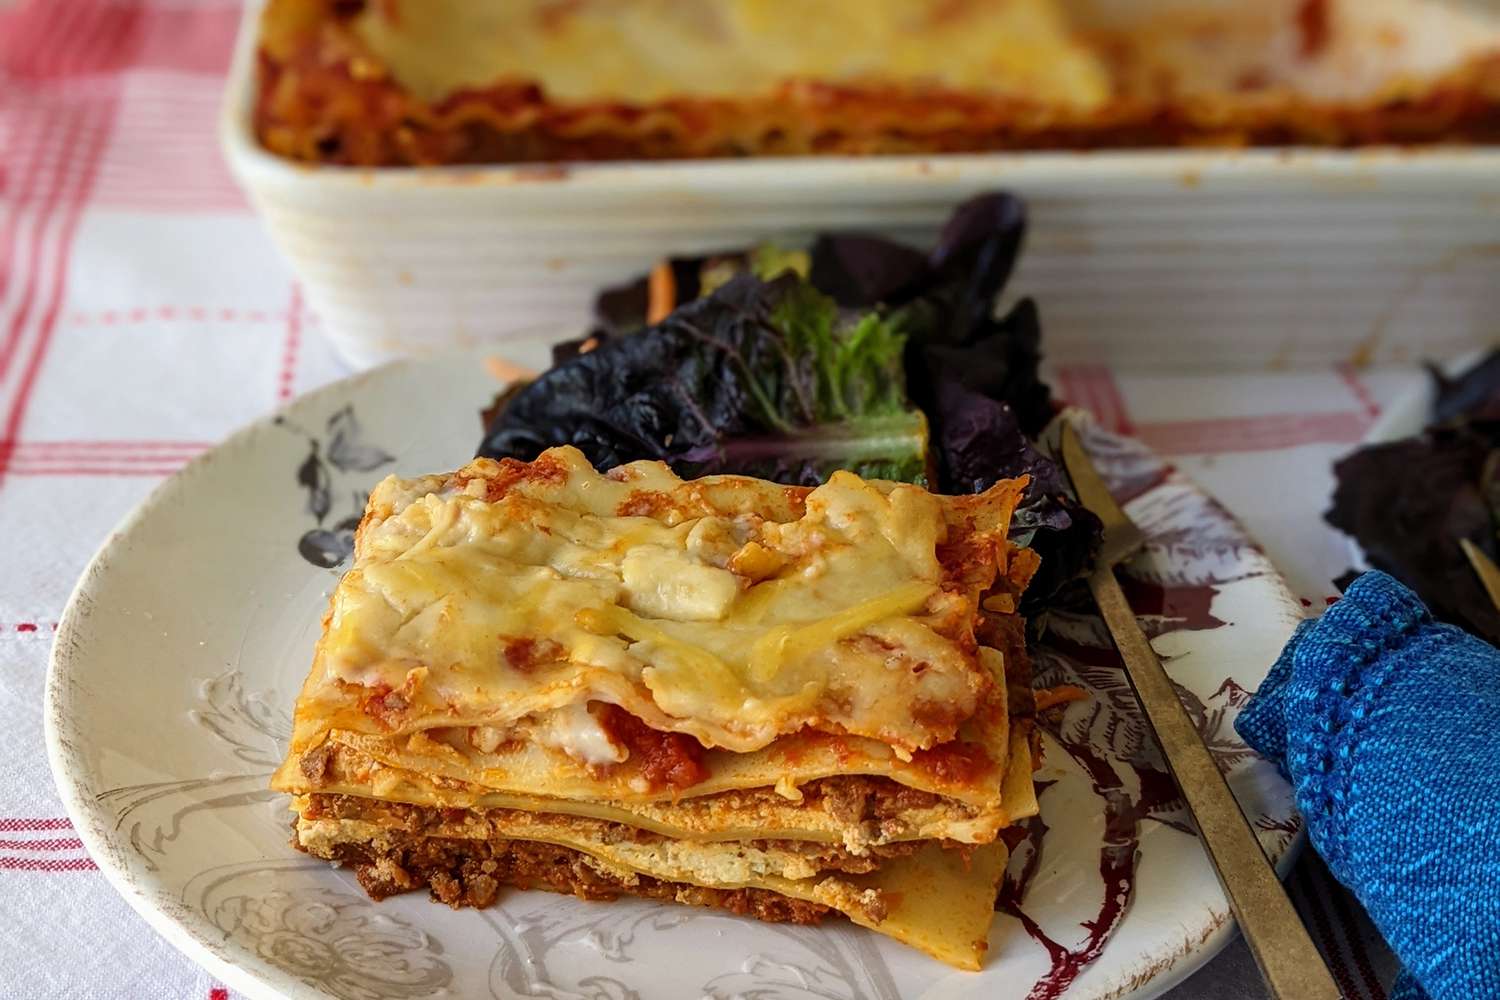 A low angle view of a plated slice of lasagna sitting in front of the pan of lasagna.